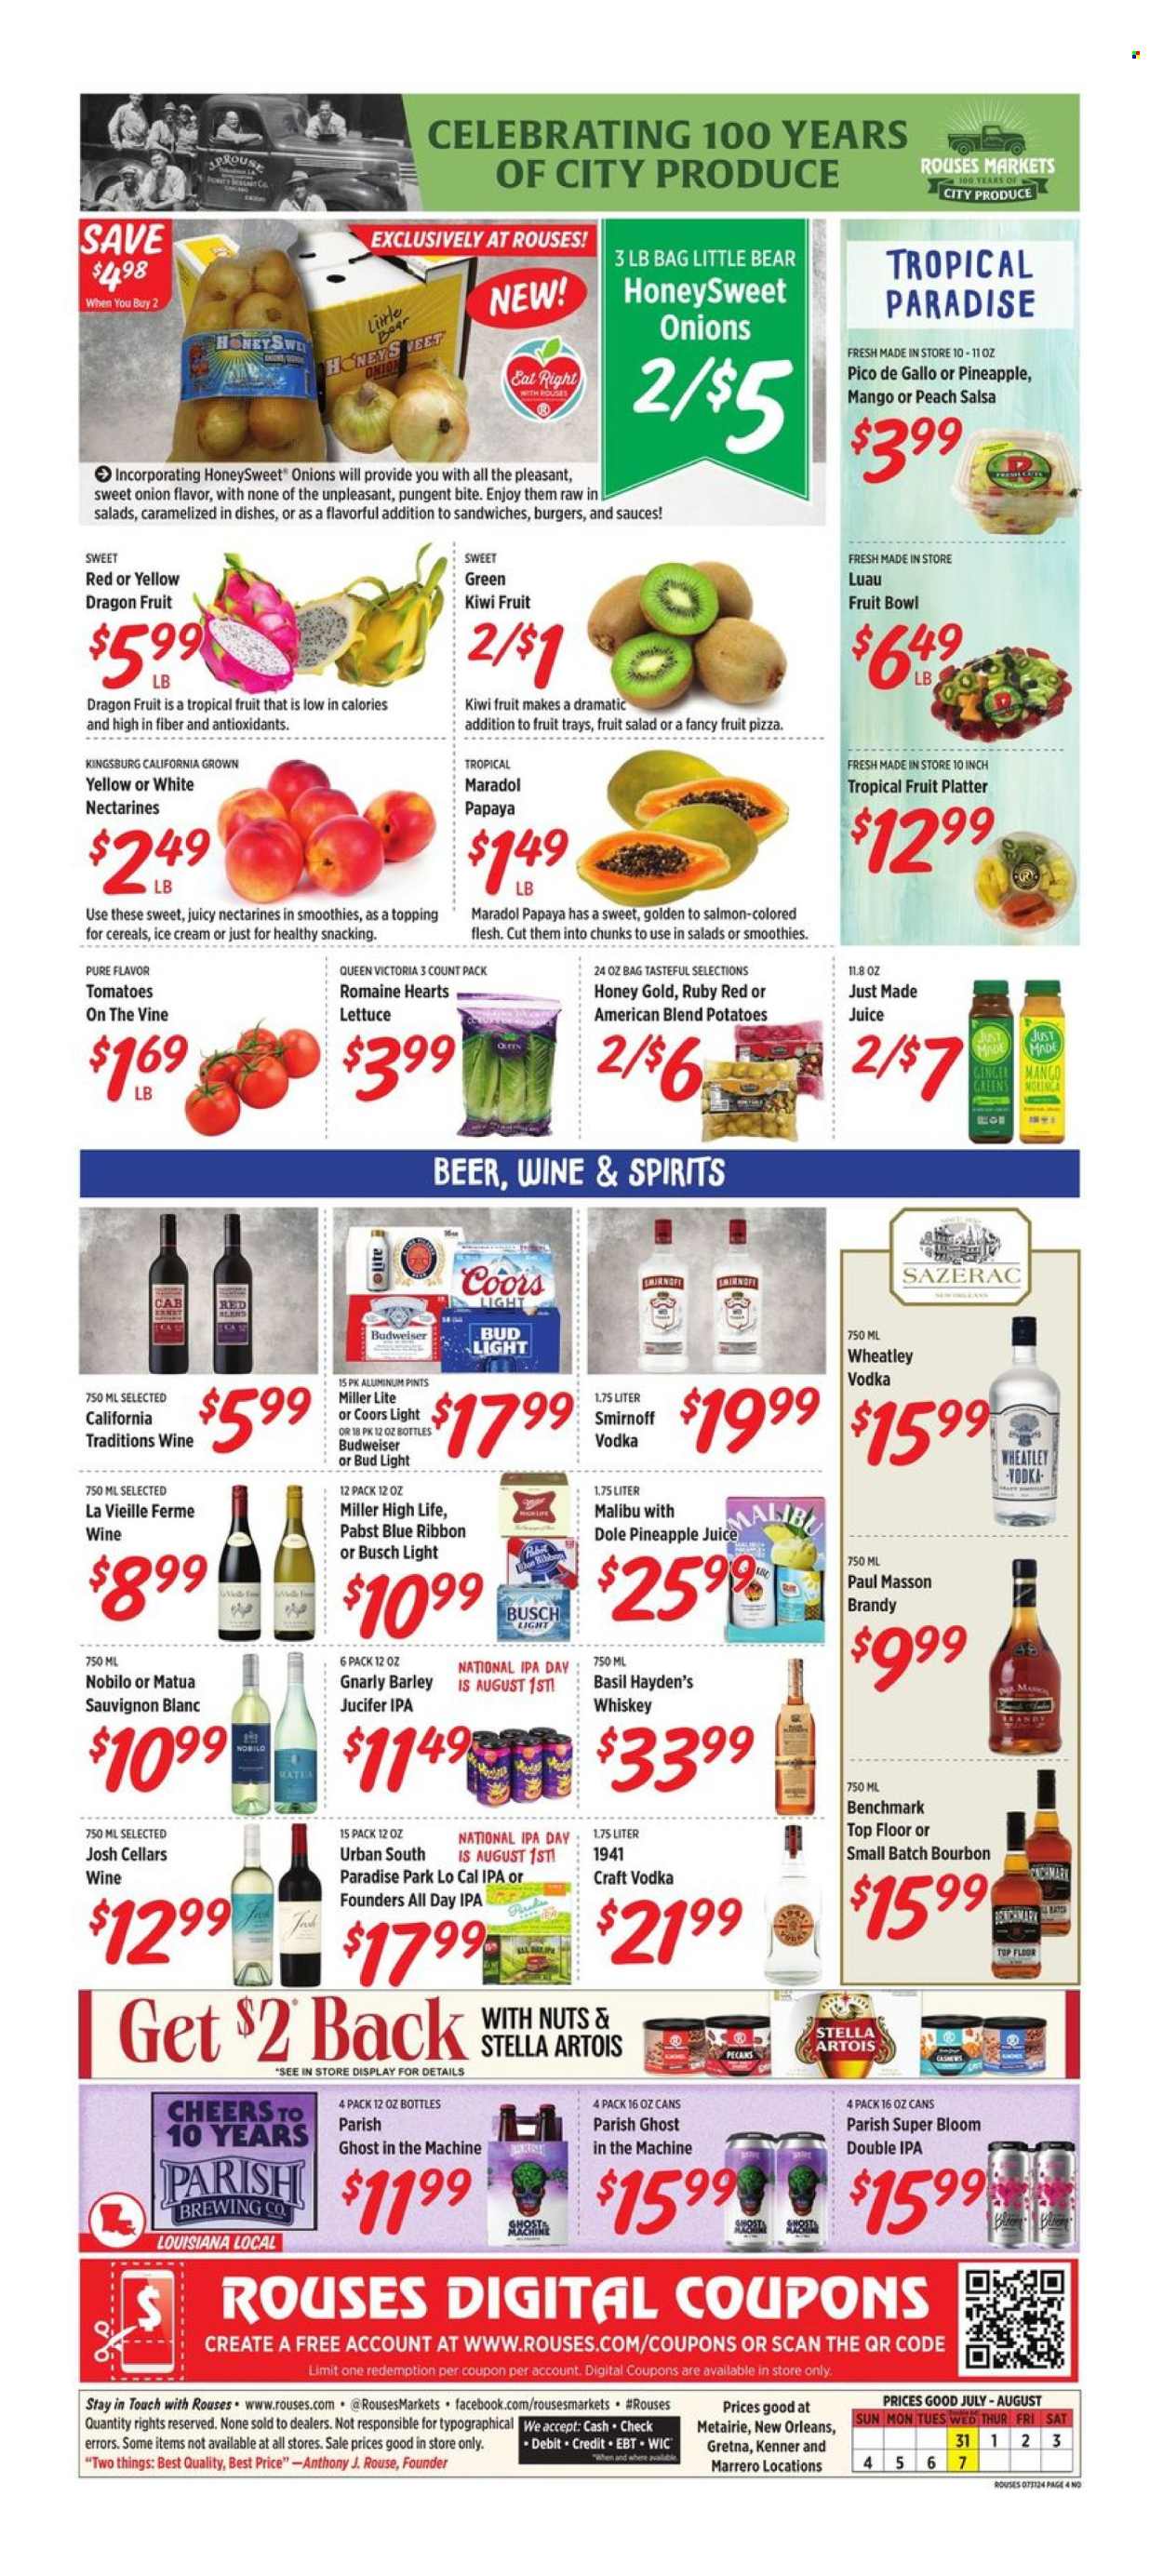 thumbnail - Rouses Markets Flyer - 07/31/2024 - 08/07/2024 - Sales products - tortillas, Old El Paso, tacos, flour tortillas, seafood, shrimps, Kraft®, ready meal, rice sides, american cheese, sandwich slices, string cheese, parmesan, cheese, grated cheese, Kraft Singles, Sargento, yoghurt, Yoplait, sour cream, Dove, Nestlé, black beans, refried beans, Uncle Ben's, Goya, Manwich, seasoning, hot sauce, dressing, salsa, sauce, pancake syrup, syrup, Coca-Cola, orange juice, juice, soft drink, Bai, Coke, antioxidant drink, flavored water, sparkling water, alkaline water, Pampers, nappies, baby pants, detergent, Febreze, Cascade, fabric softener, laundry detergent, scent booster, Downy Laundry, dishwashing liquid, body wash, shampoo, toothpaste, Crest, conditioner, Pantene, body lotion, Jergens, Gillette, shave gel, air freshener. Page 6.